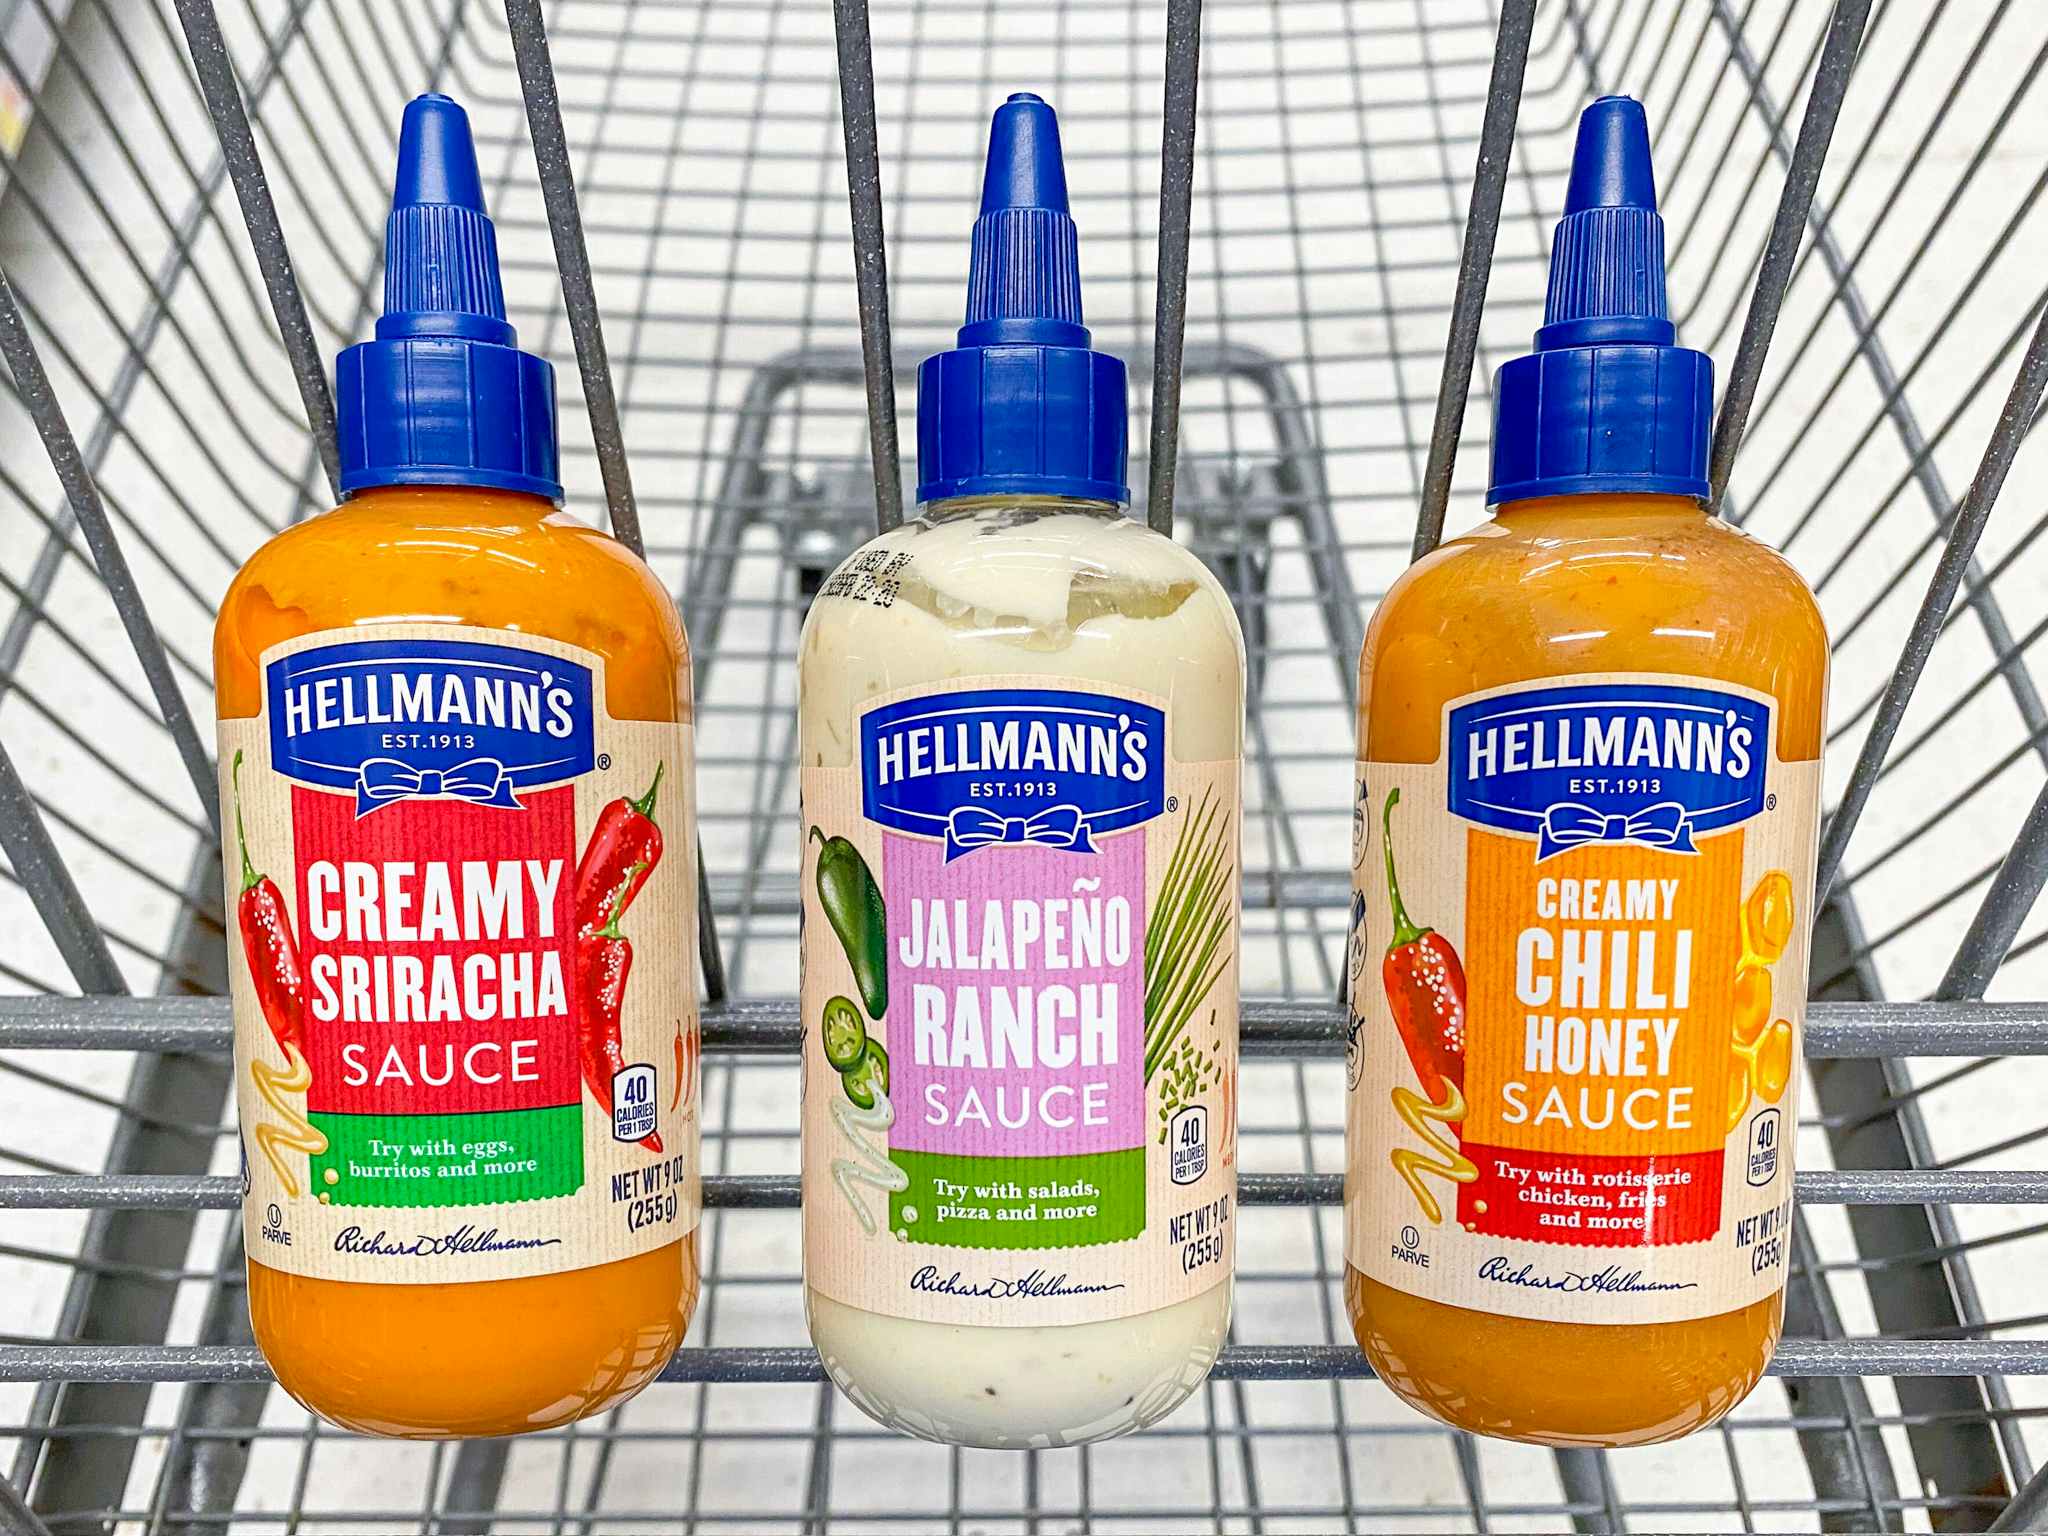 Hellmann's Drizzle Sauce products in Walmart shopping cart